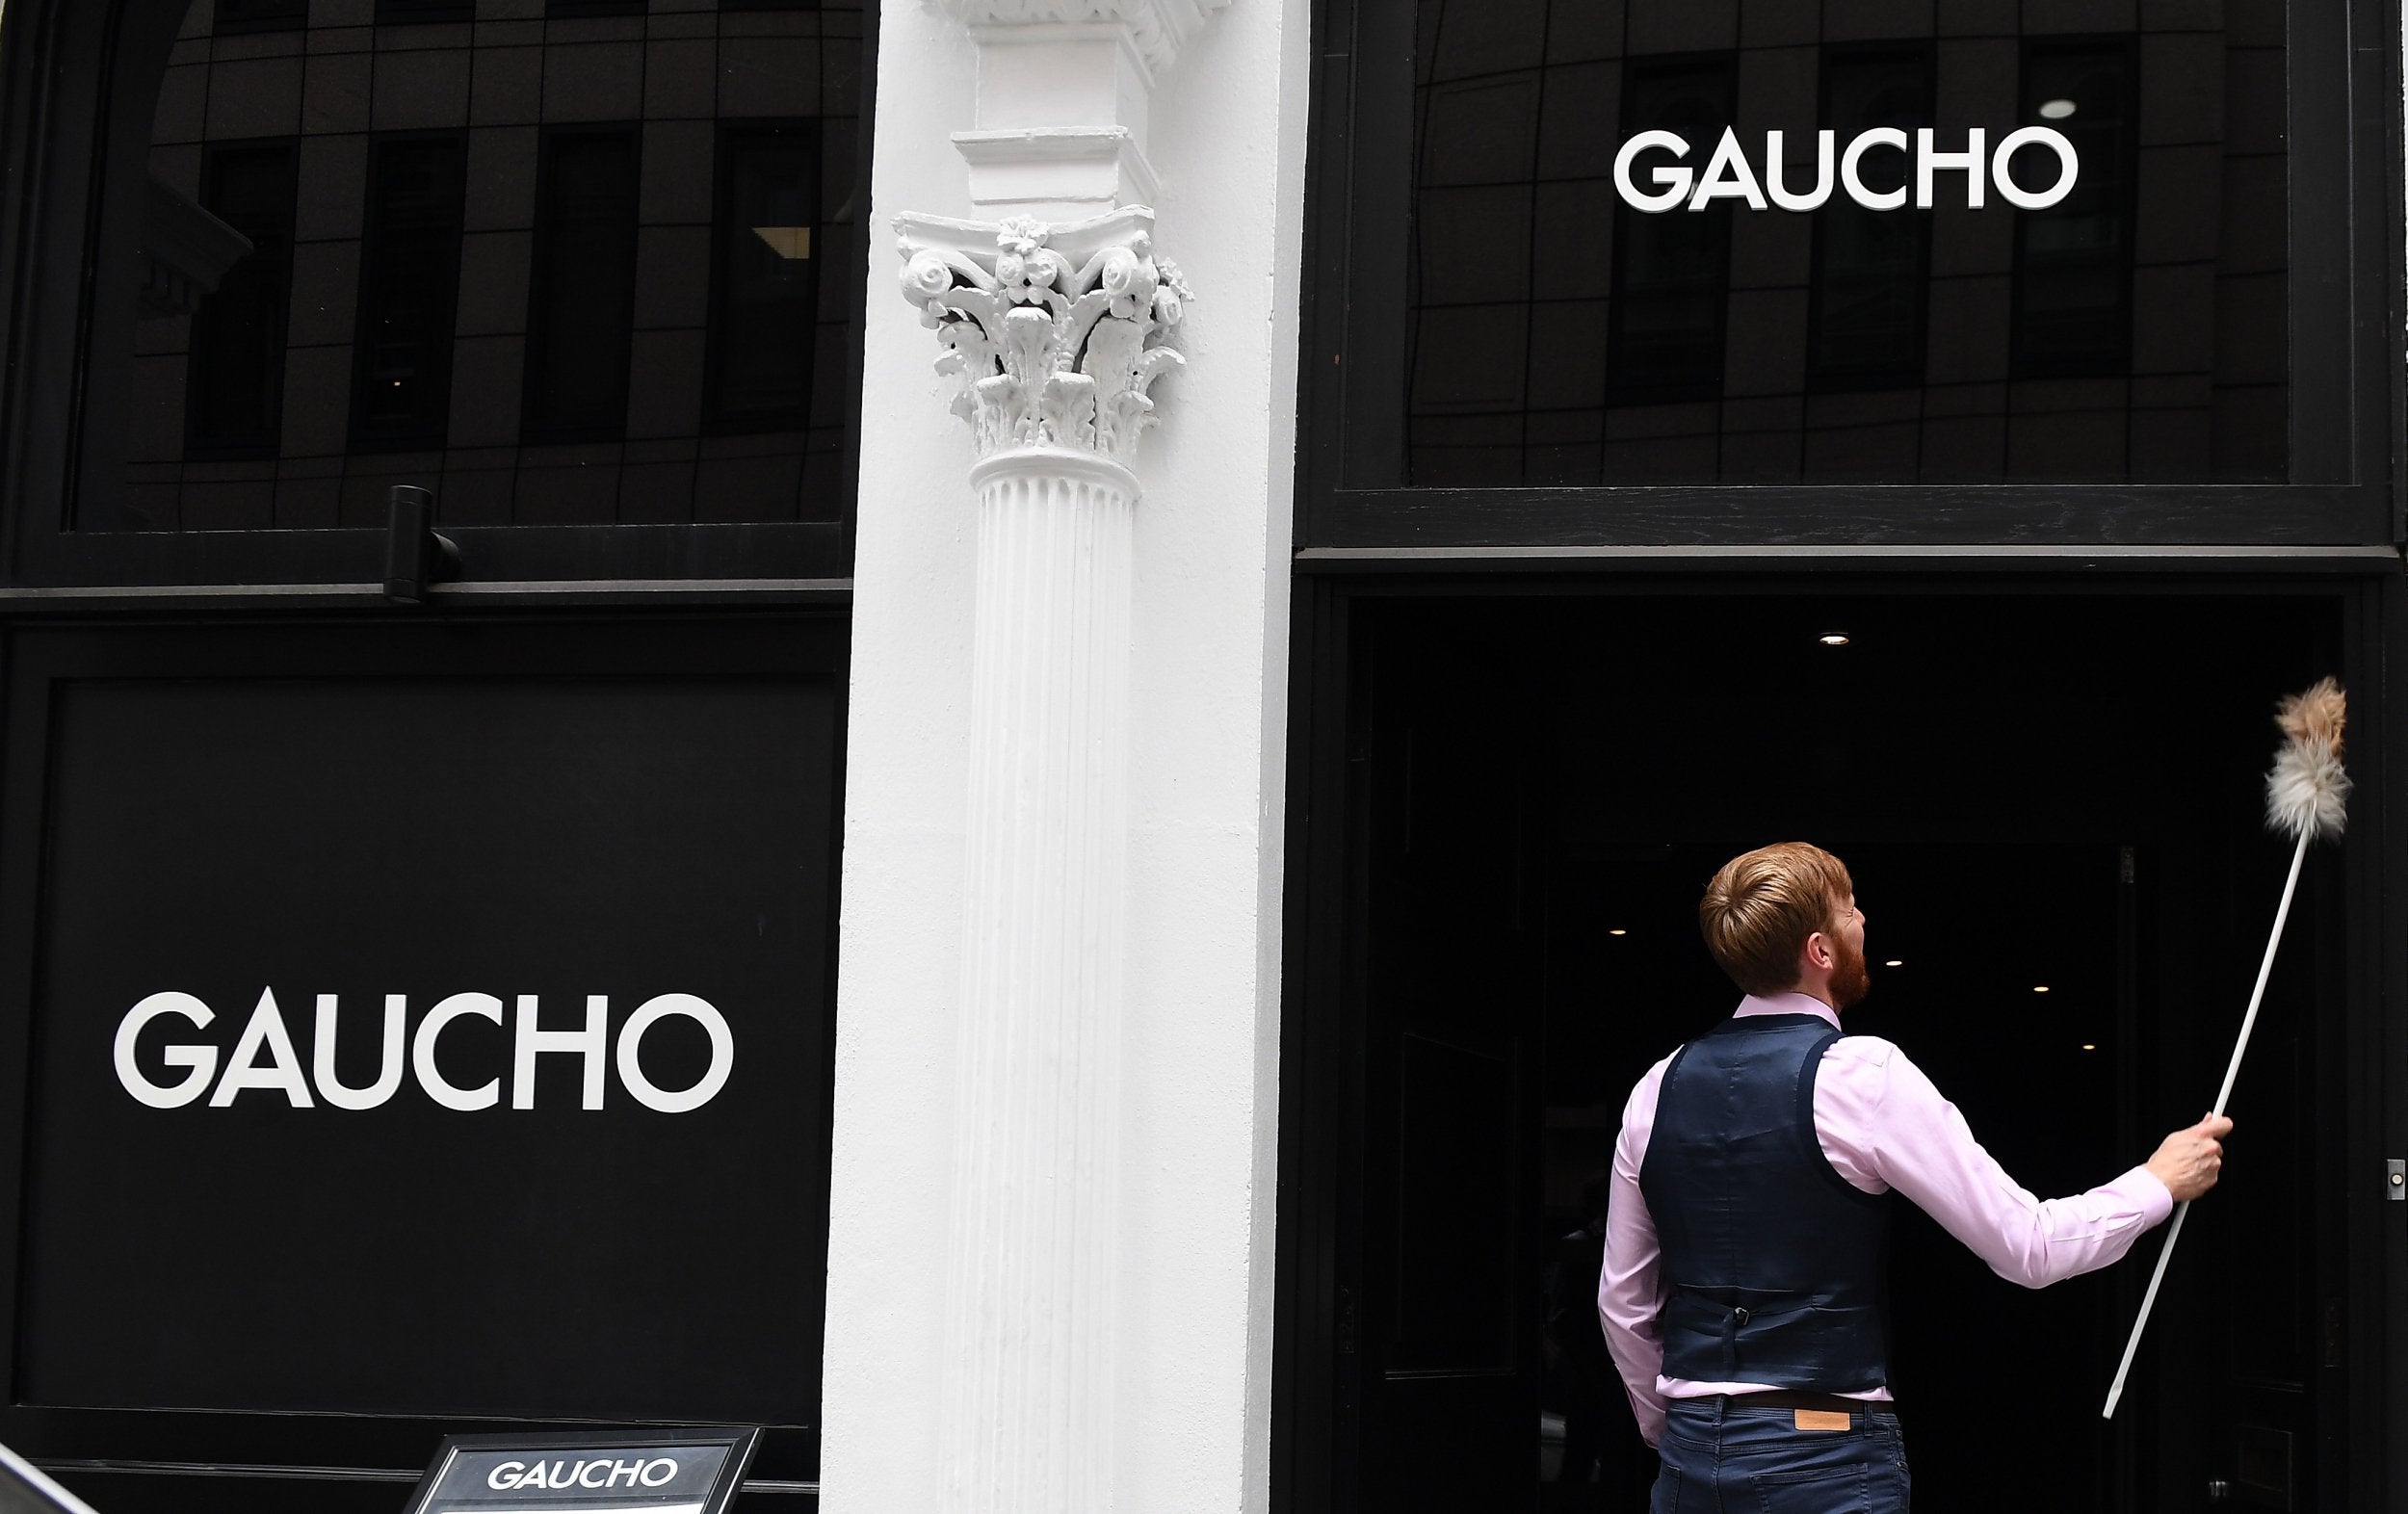 The Cau brand has struggled in an 'oversupplied' casual dining sector but he said the more premium Gaucho restaurants continue to trade well, Deloitte said